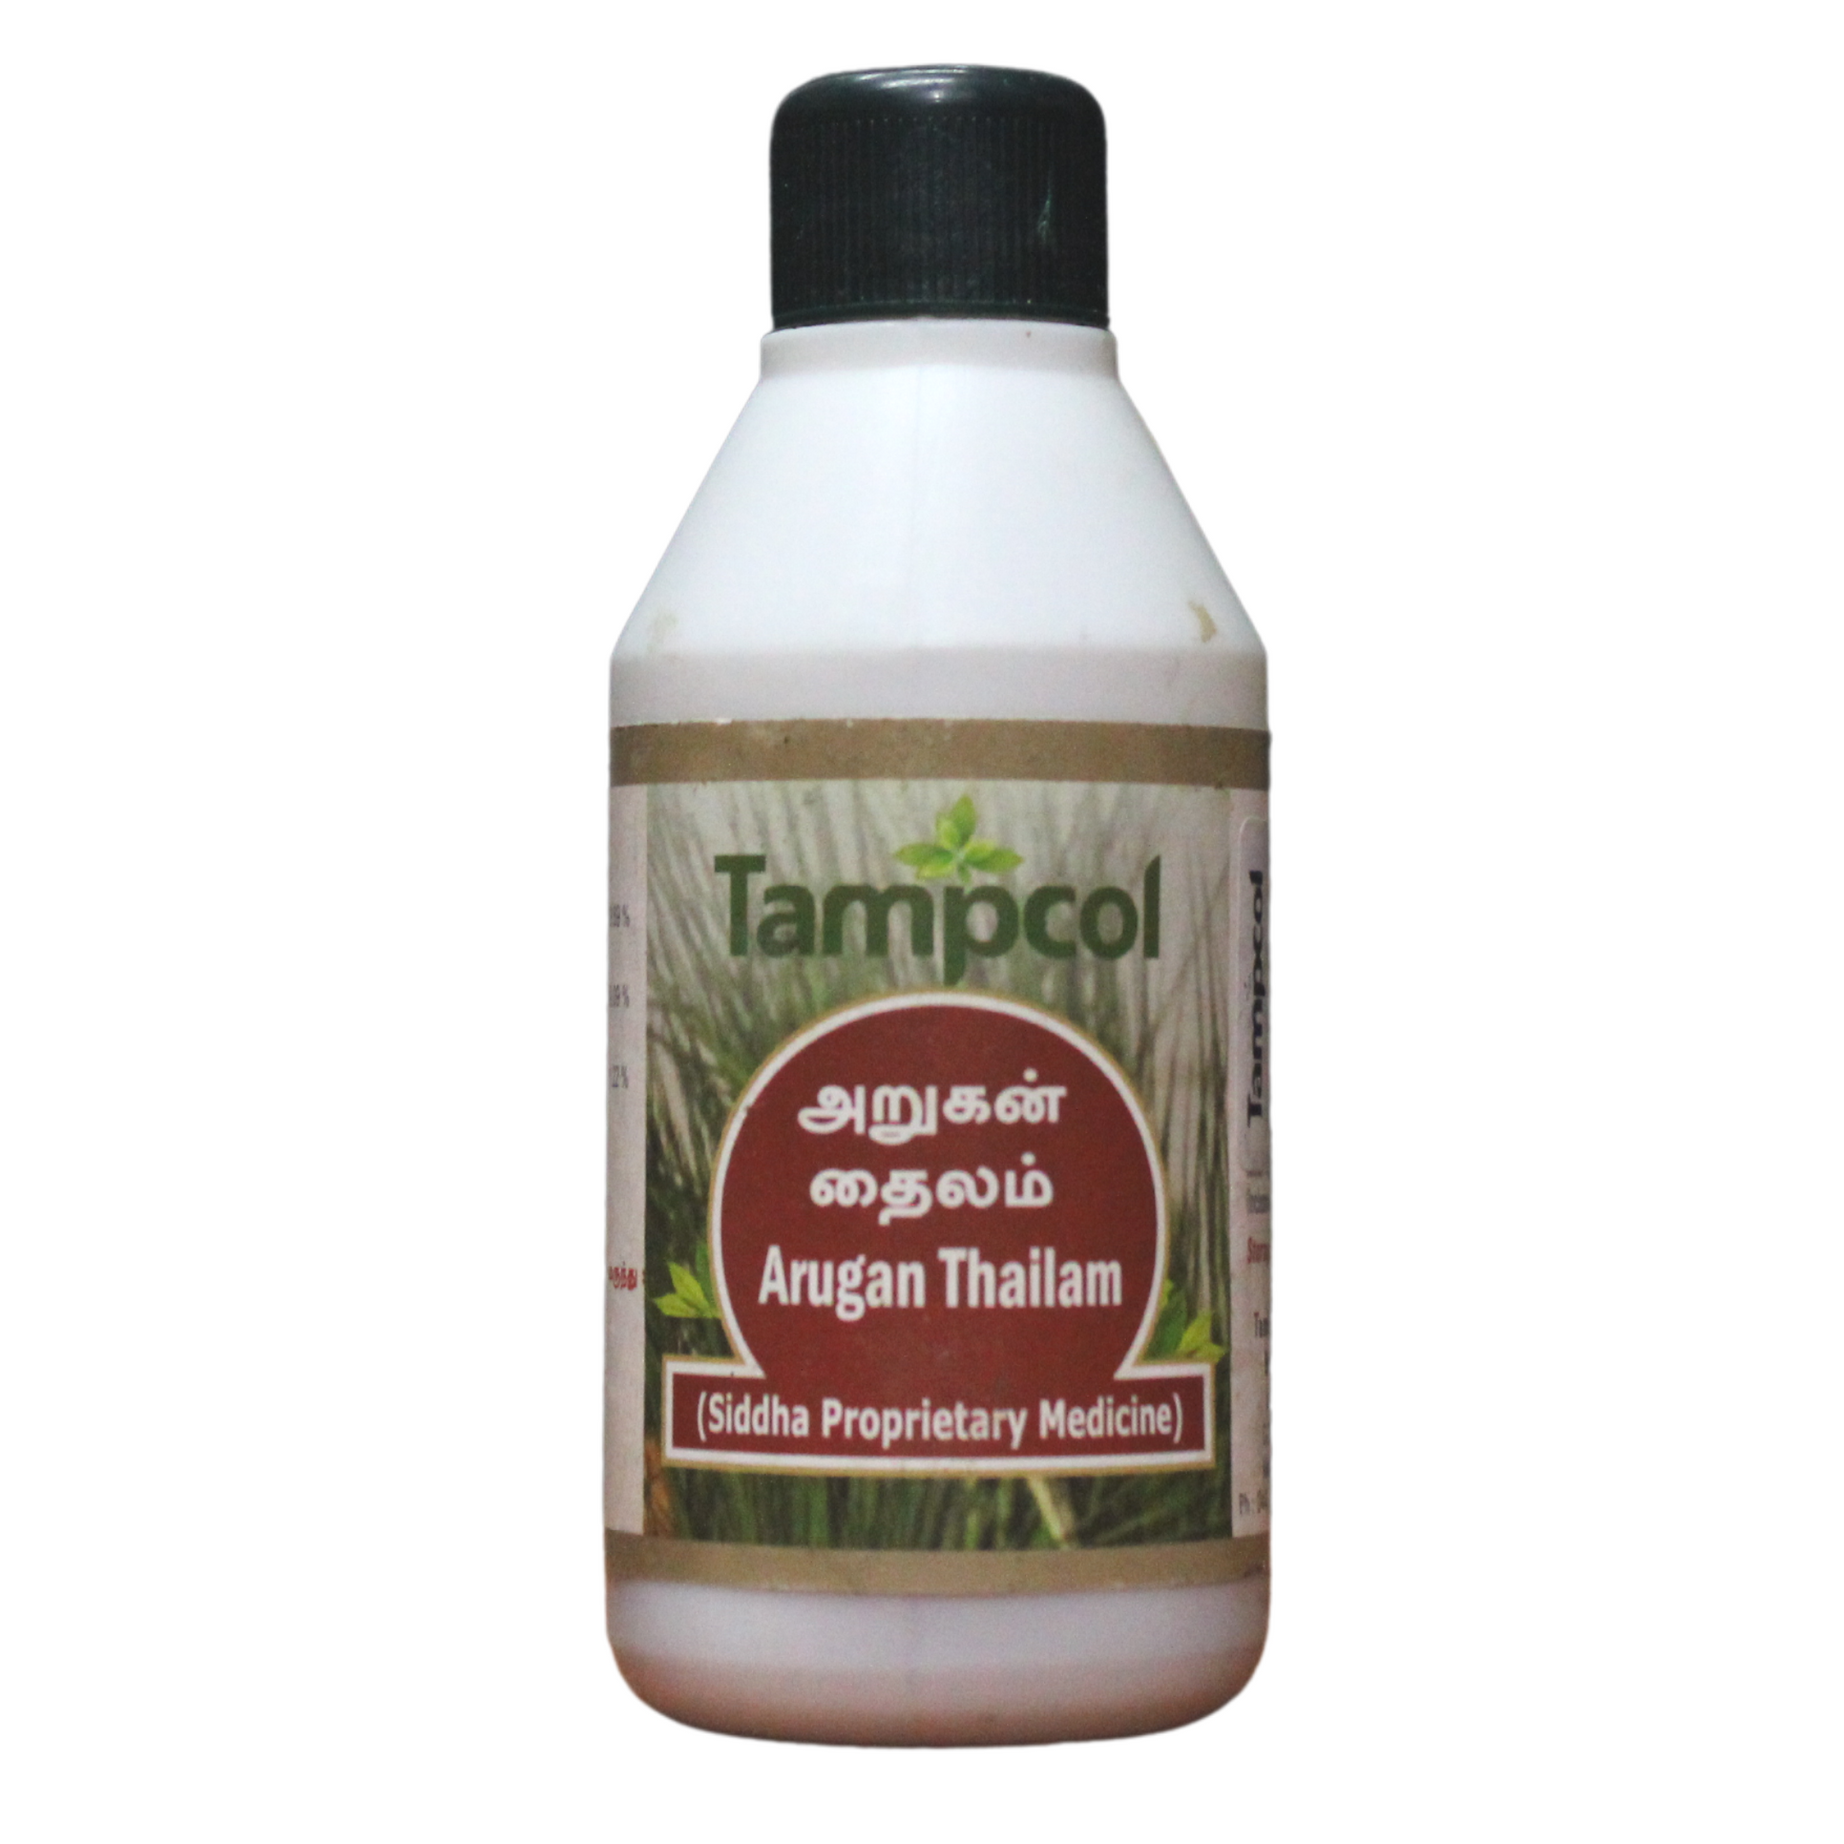 Shop Tampcol Arugan Thailam 100ml at price 64.50 from Tampcol Online - Ayush Care